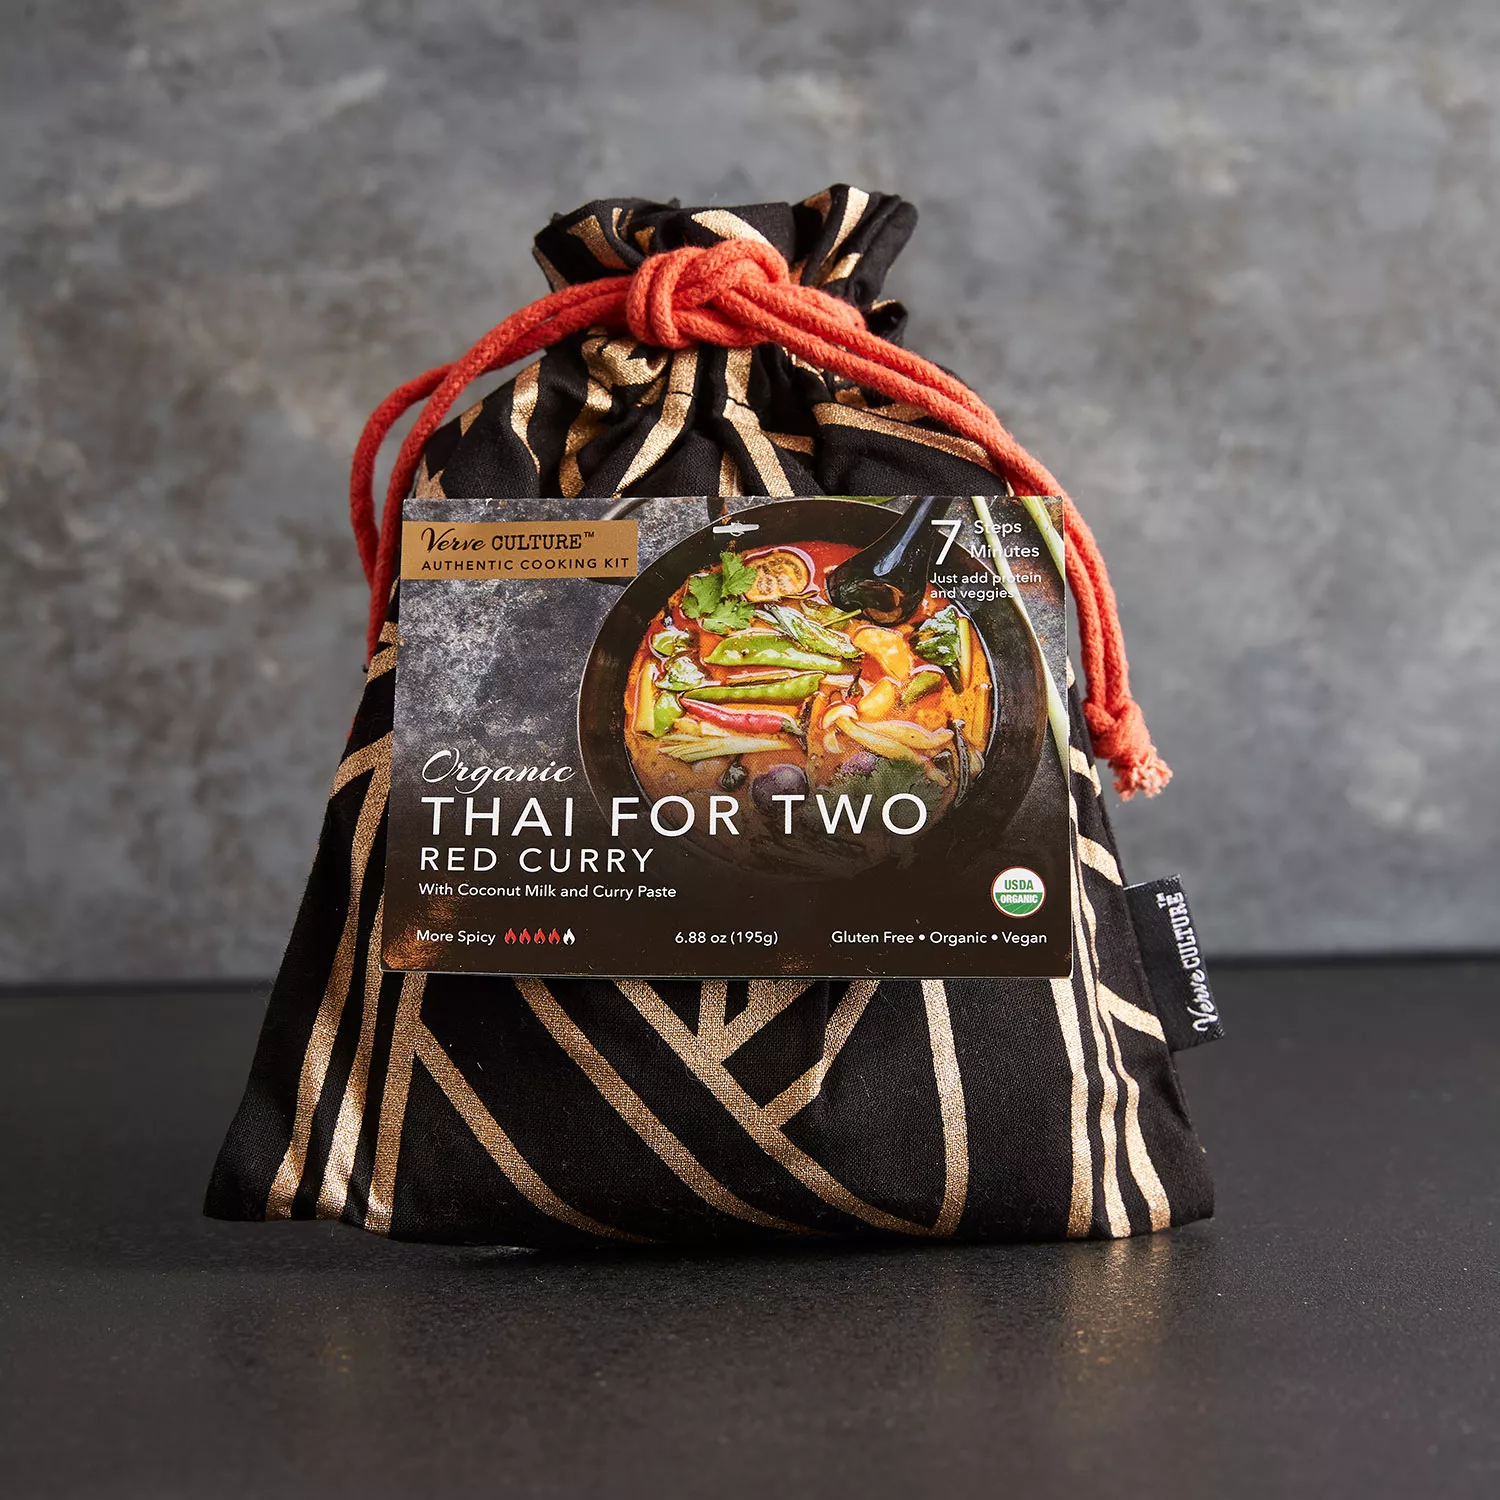 Thai for Two, Verve Culture Organic Curry Set of 3